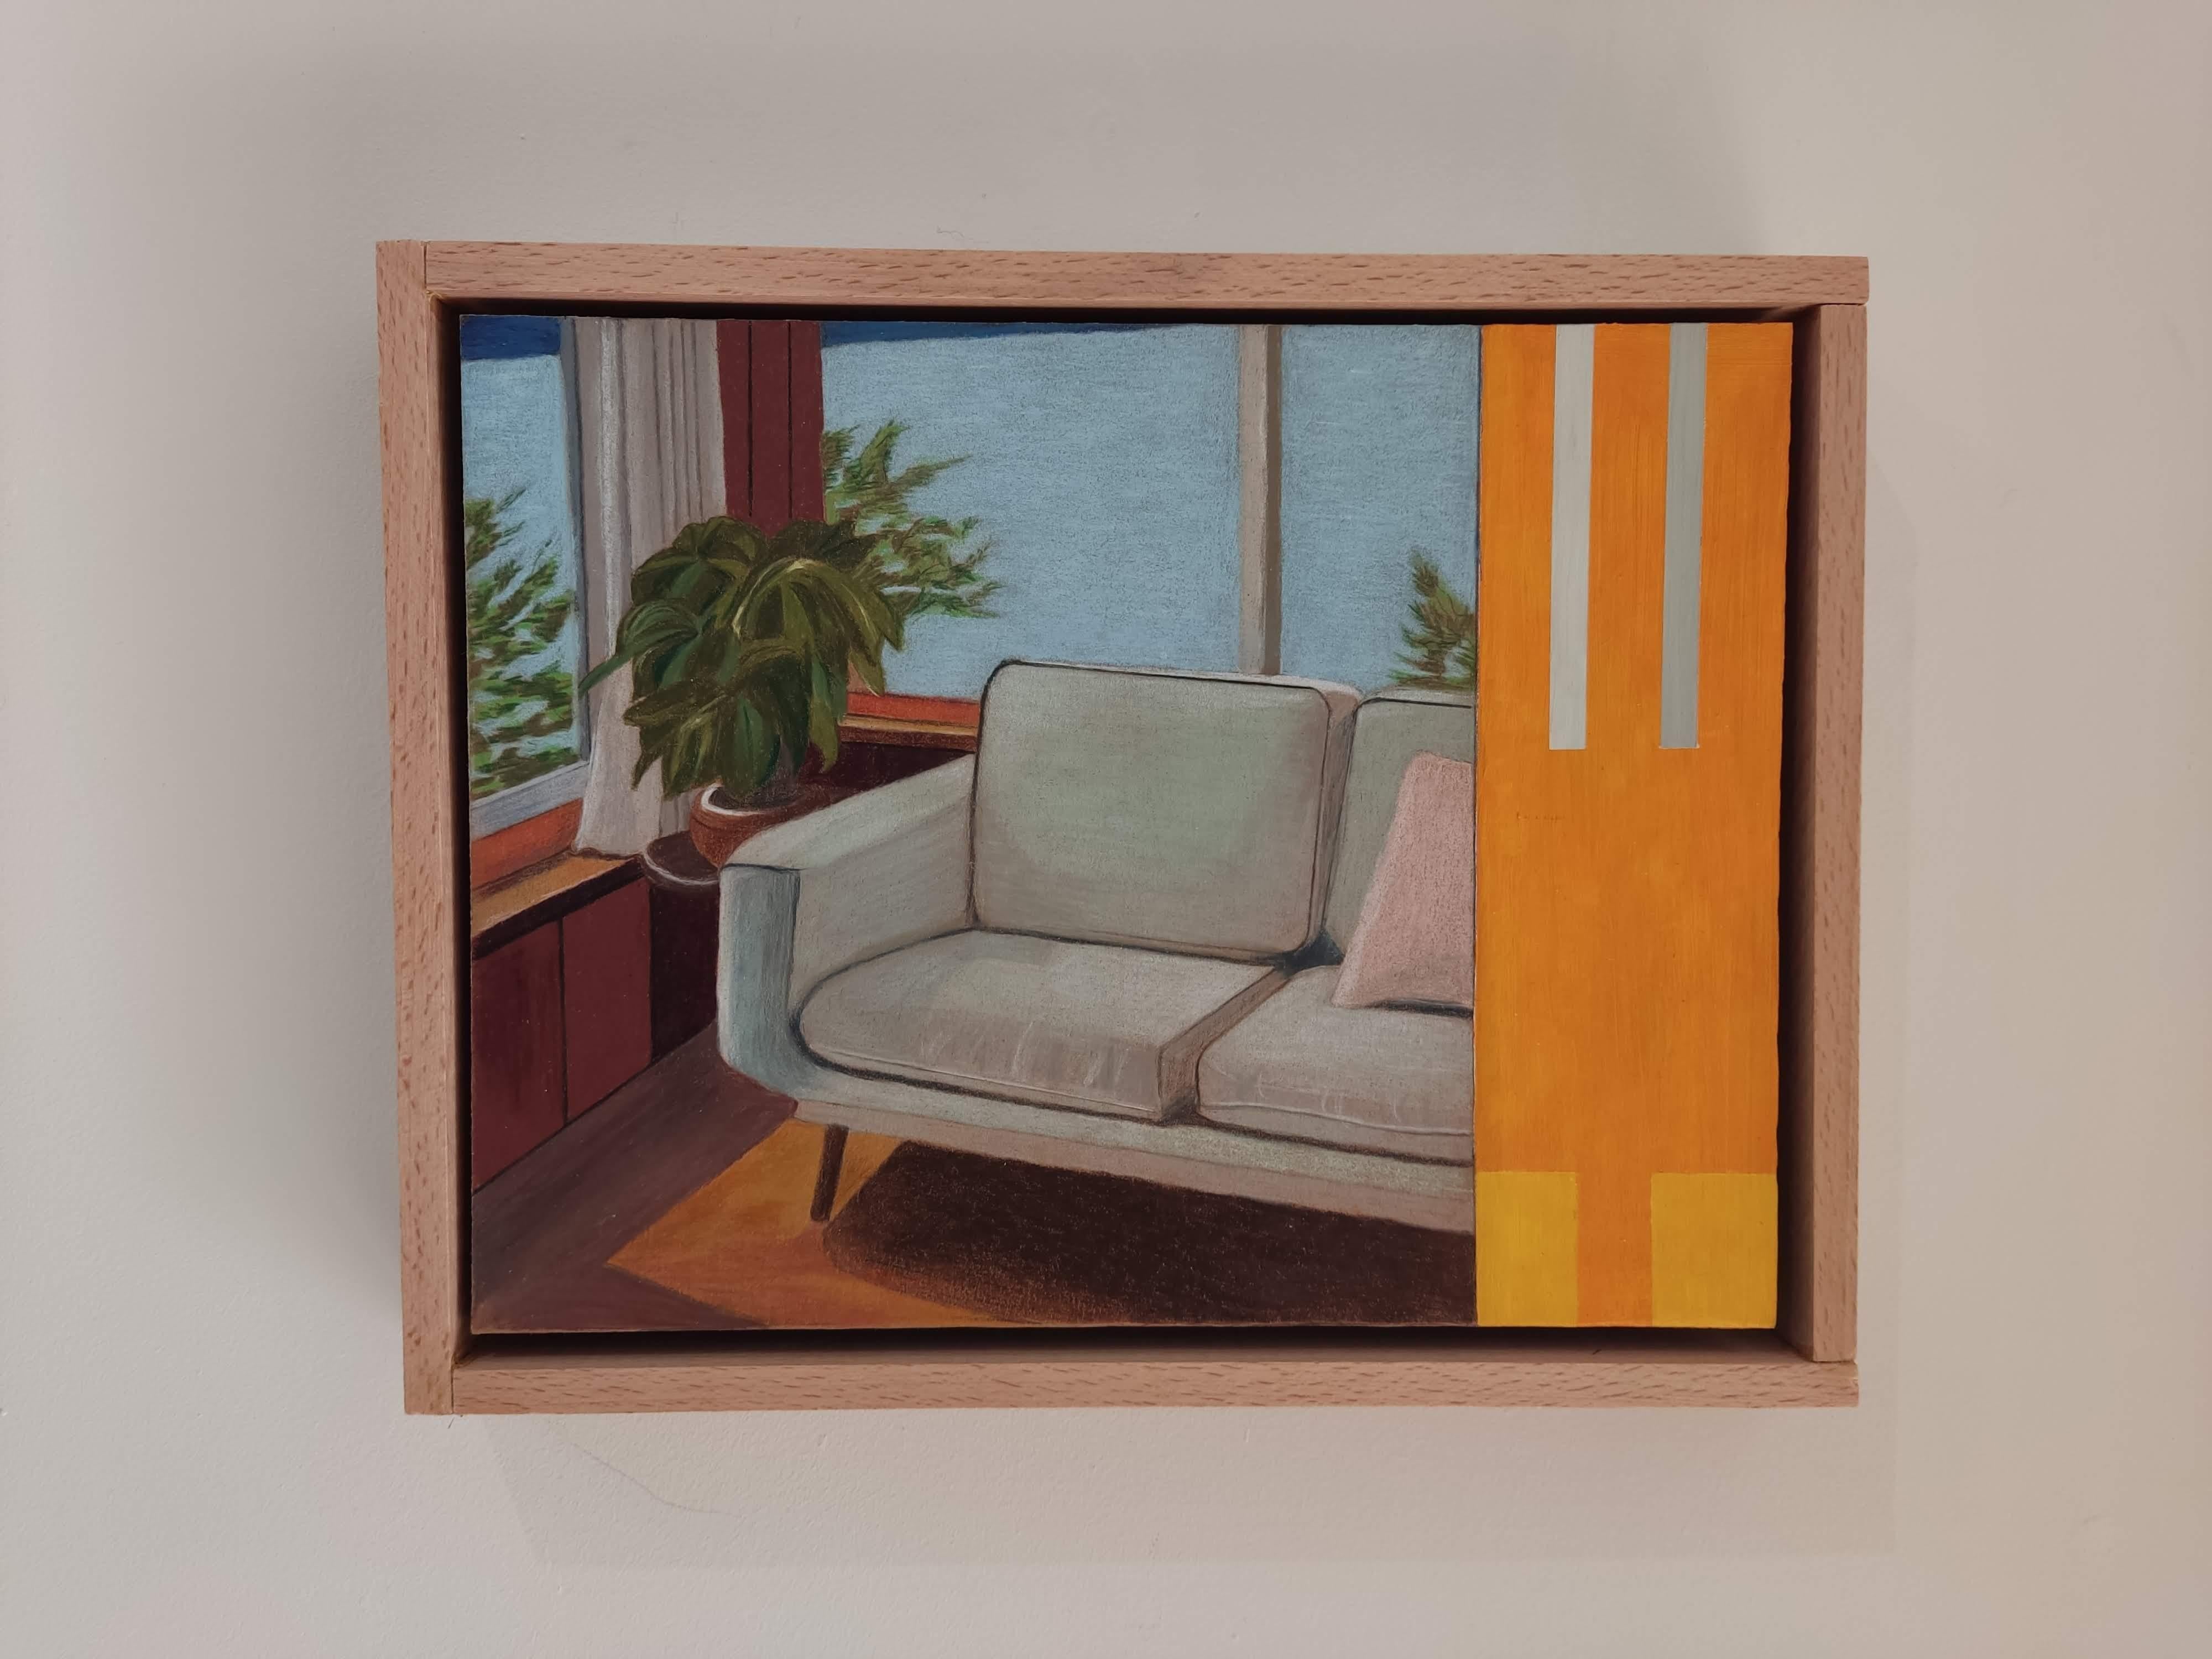 Oil painting and Oil based color pencils on Archival Cardboard 2mm - Original Painting and Drawing, Still-Life, Interior, Ready to hang
Work Title : Fenêtre sur lac  (EN : Window on lake)
Artist : Gabriel Riesnert (French artist, Born in 1970, lives